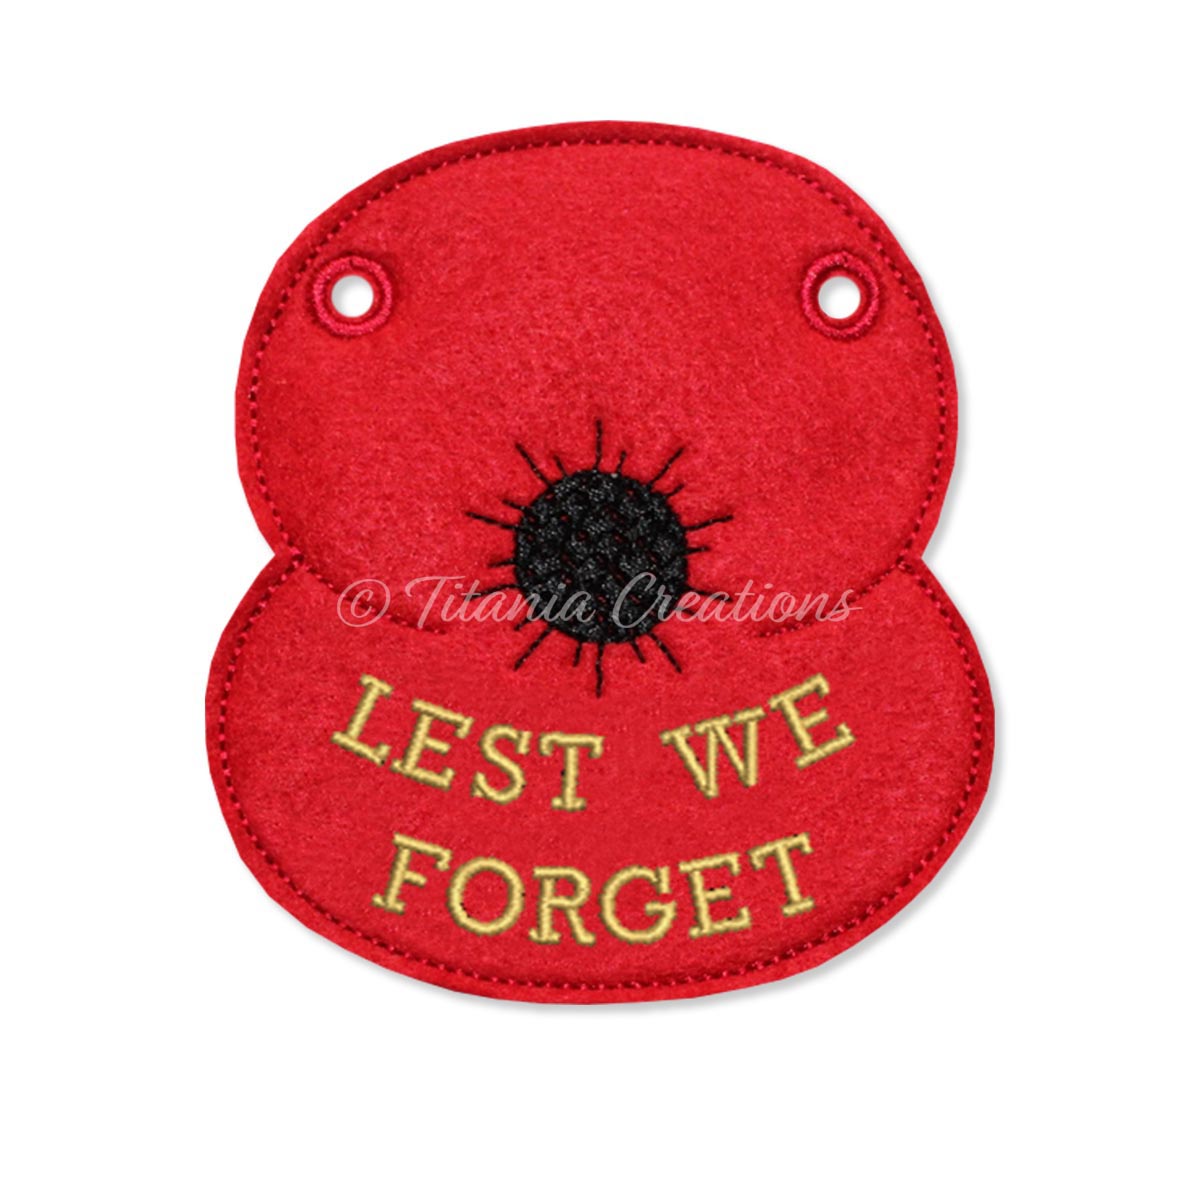 ITH Lest We Forget Poppy Bunting 4x4